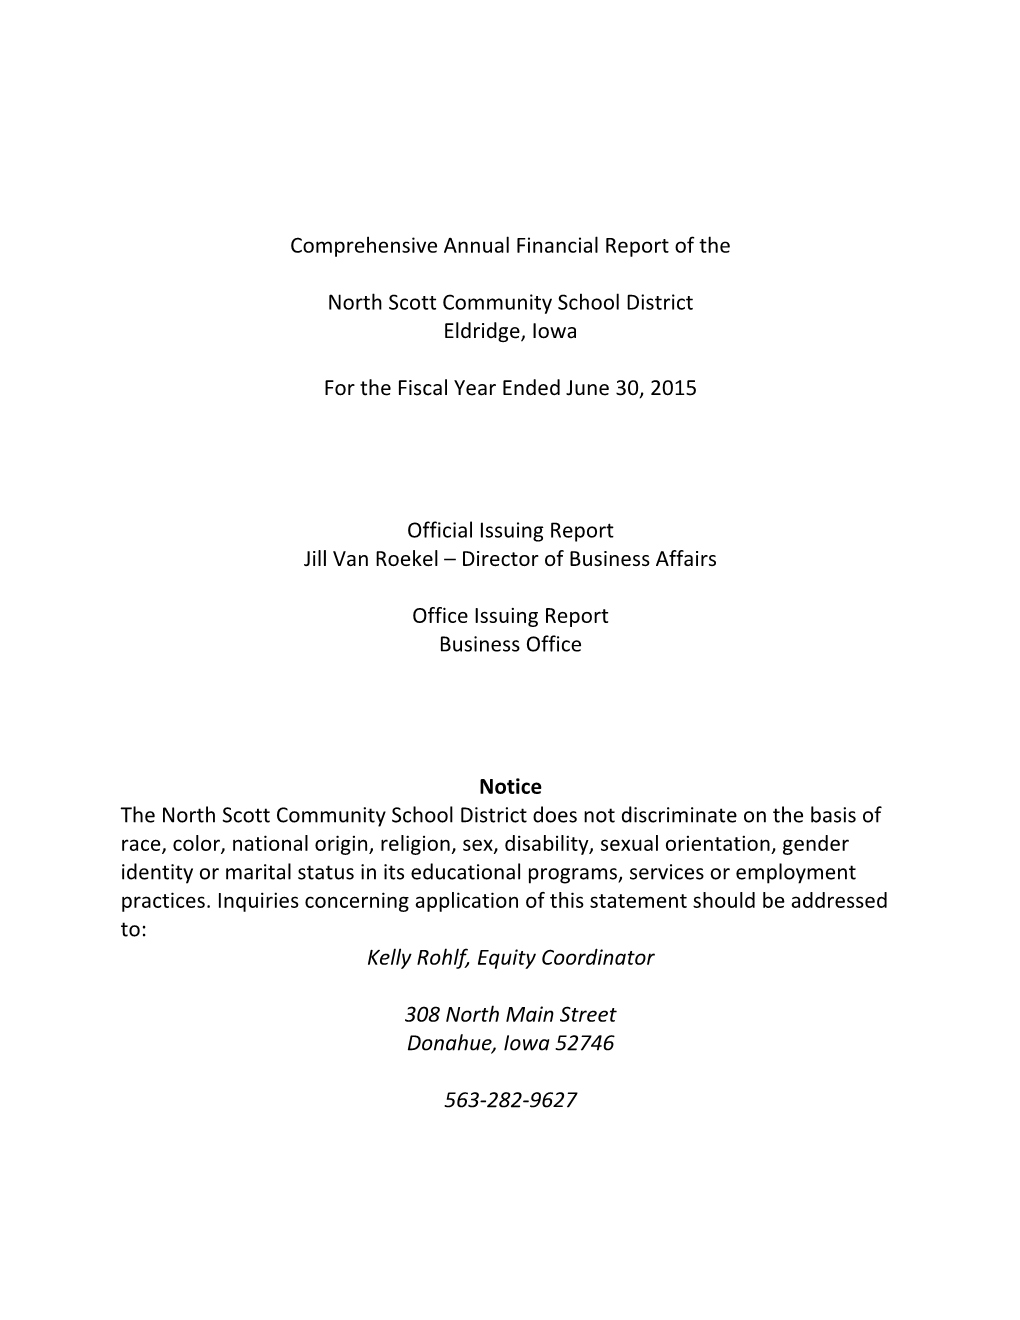 Comprehensive Annual Financial Report of the North Scott Community School District Eldridge, Iowa for the Fiscal Year Ended June